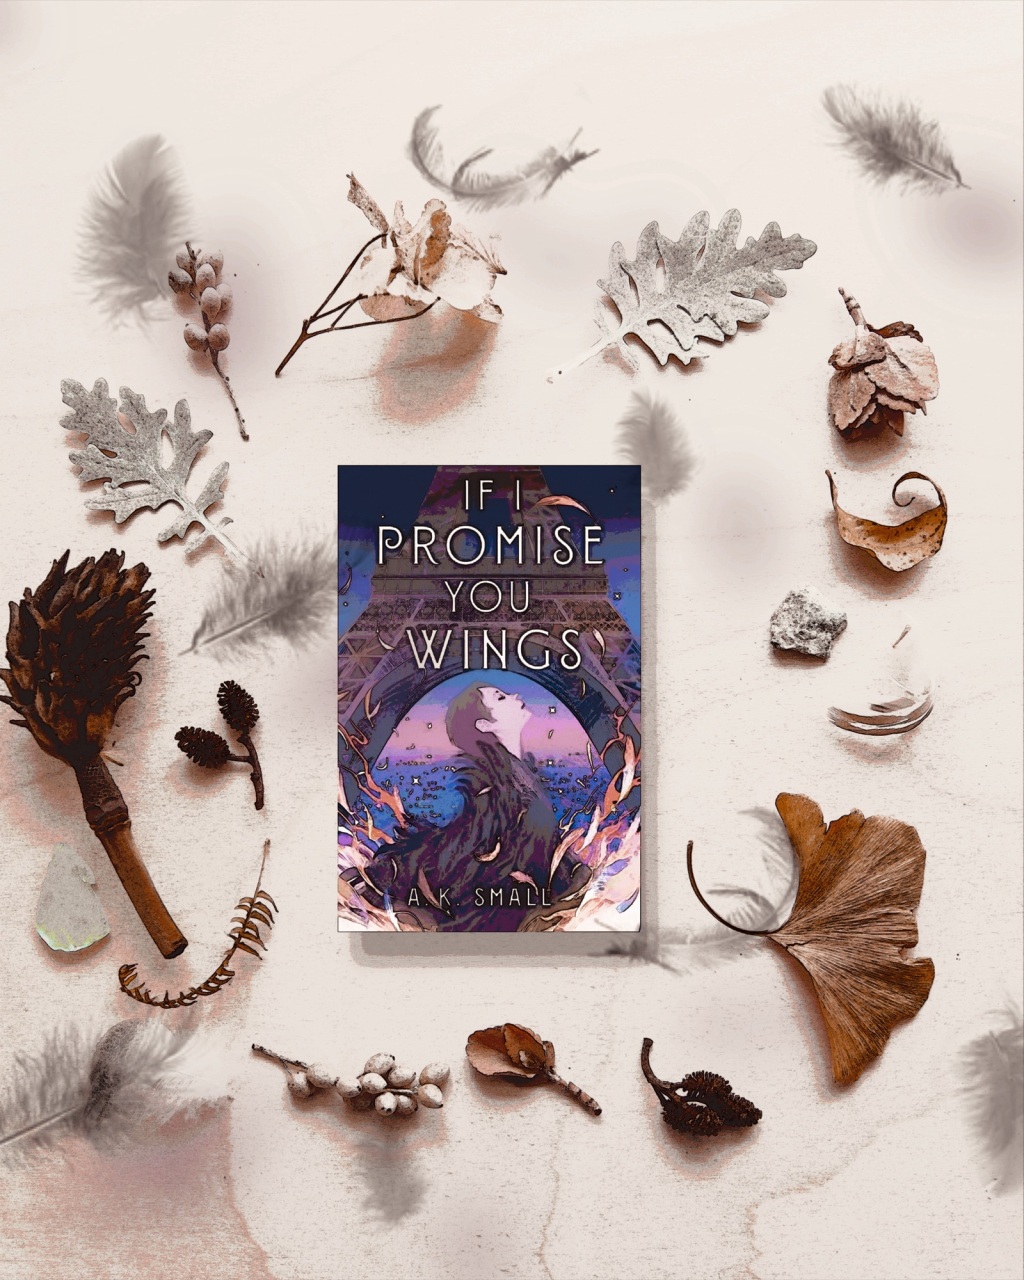 Book Review: If I Promise you Wings by A. K. Small